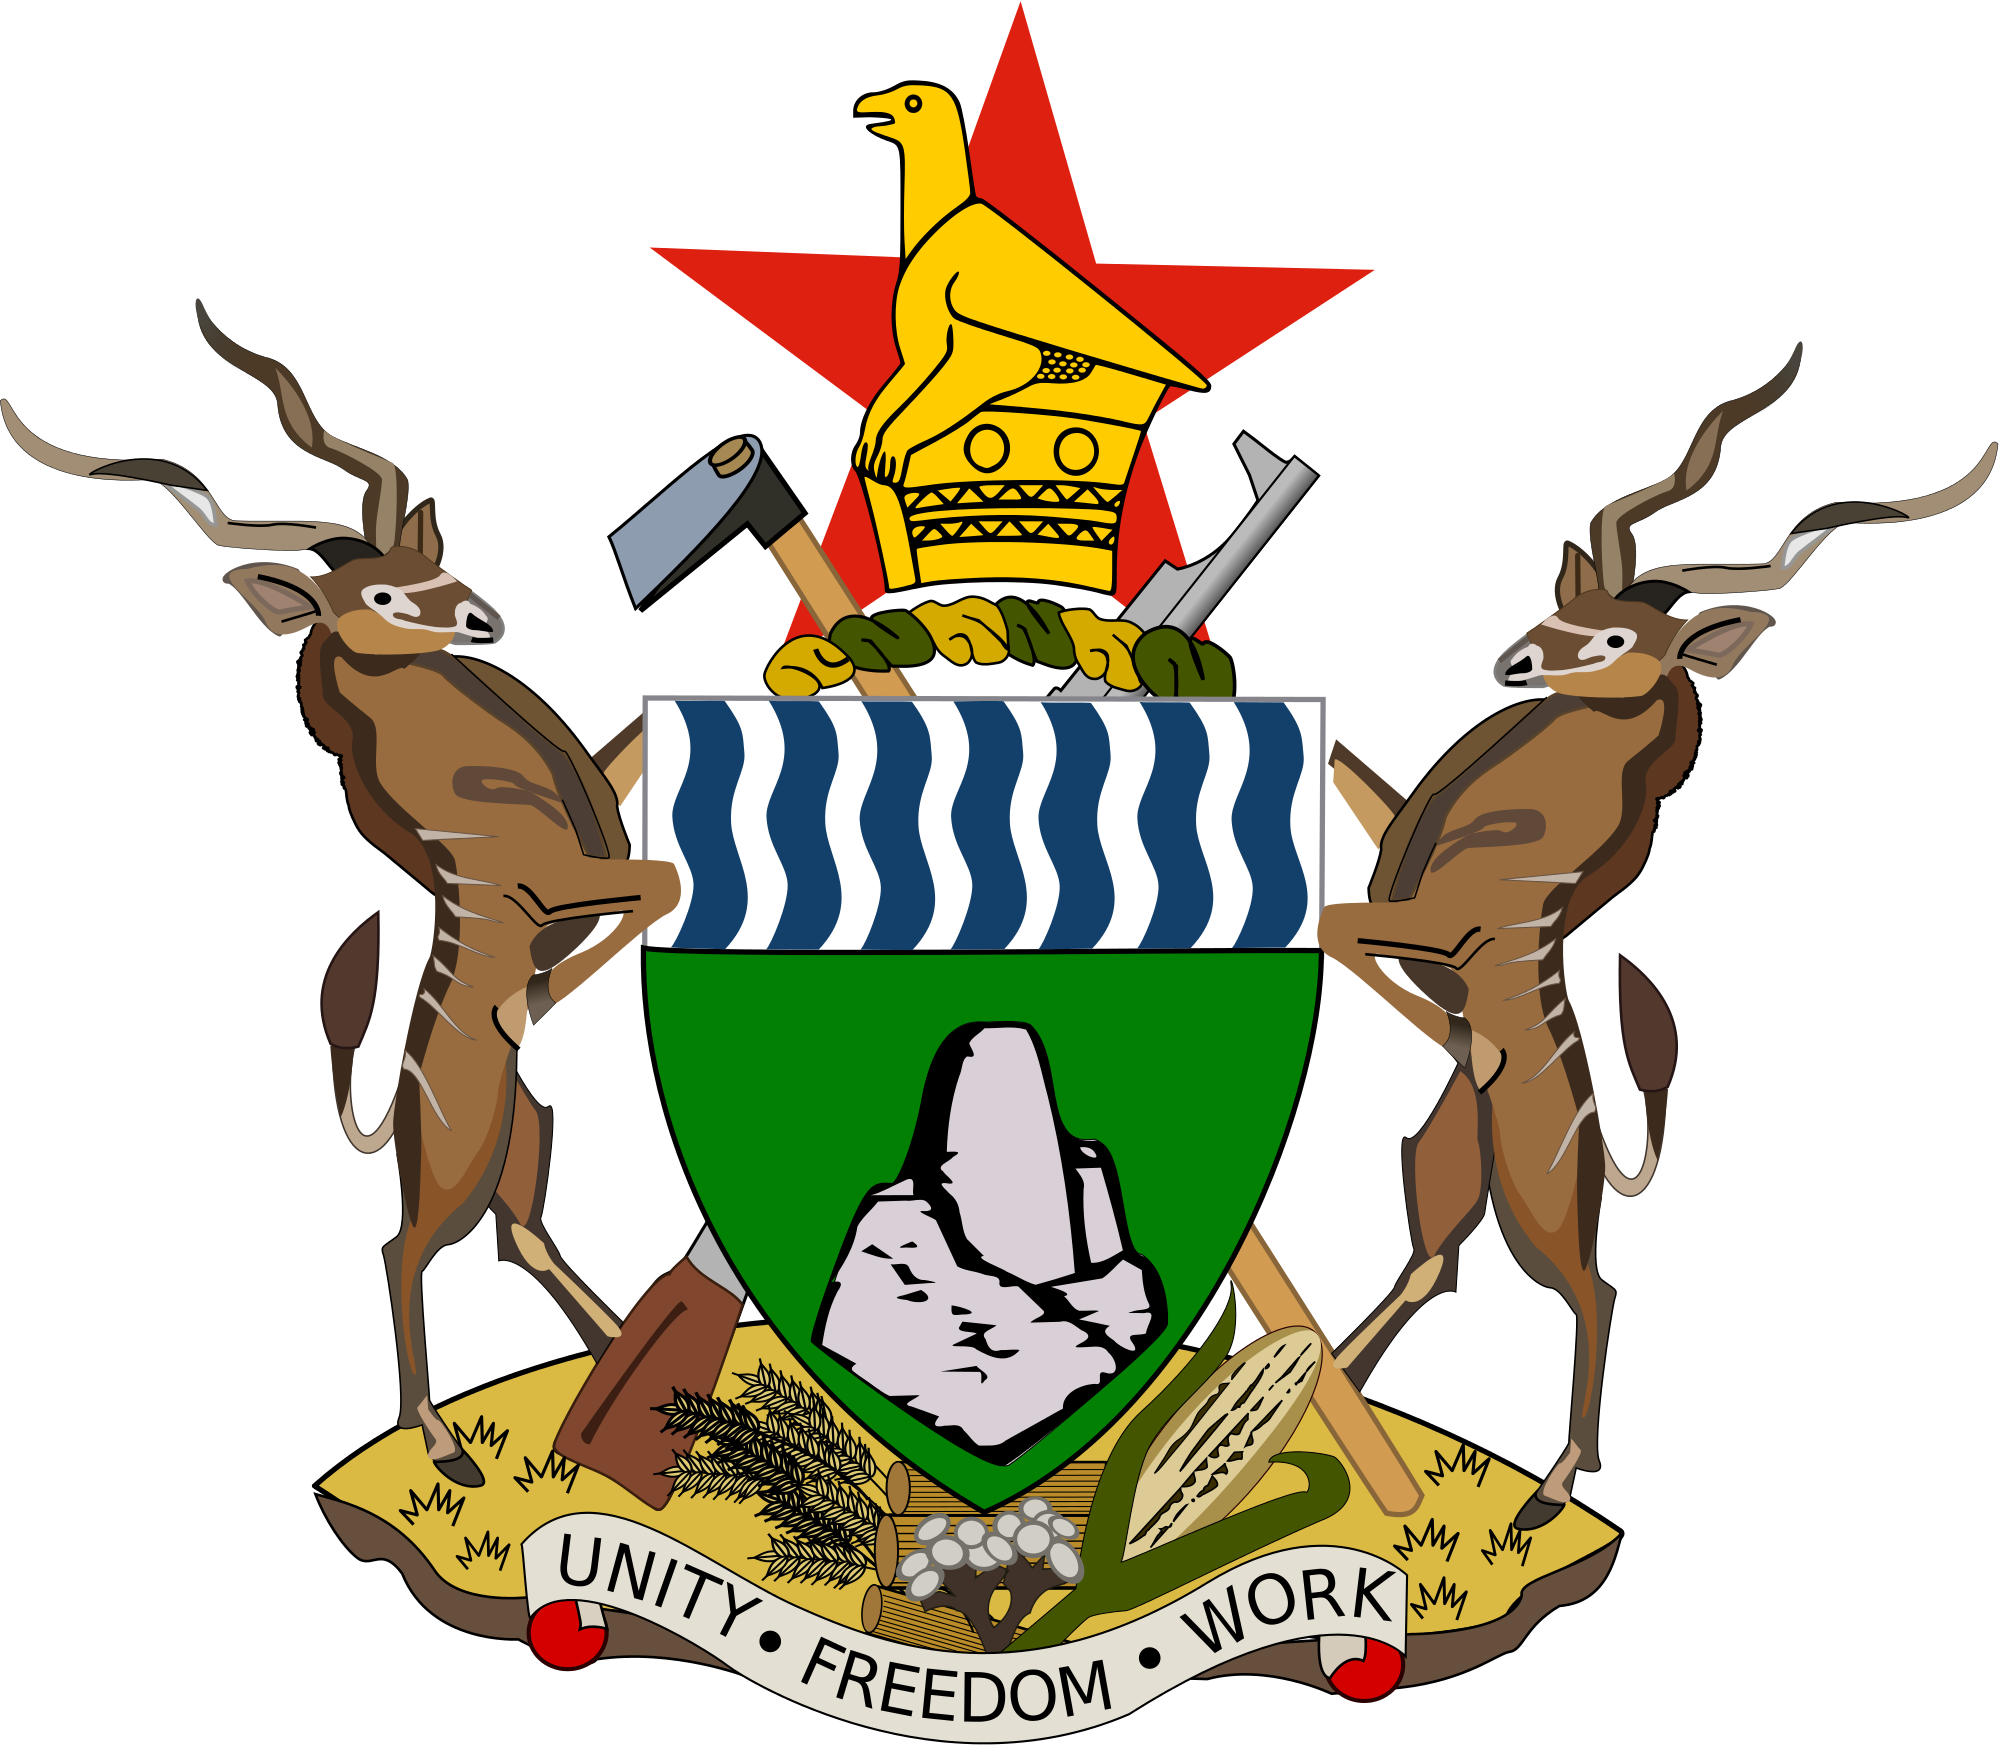 A Coat Of Arms With Antelopes And A Star